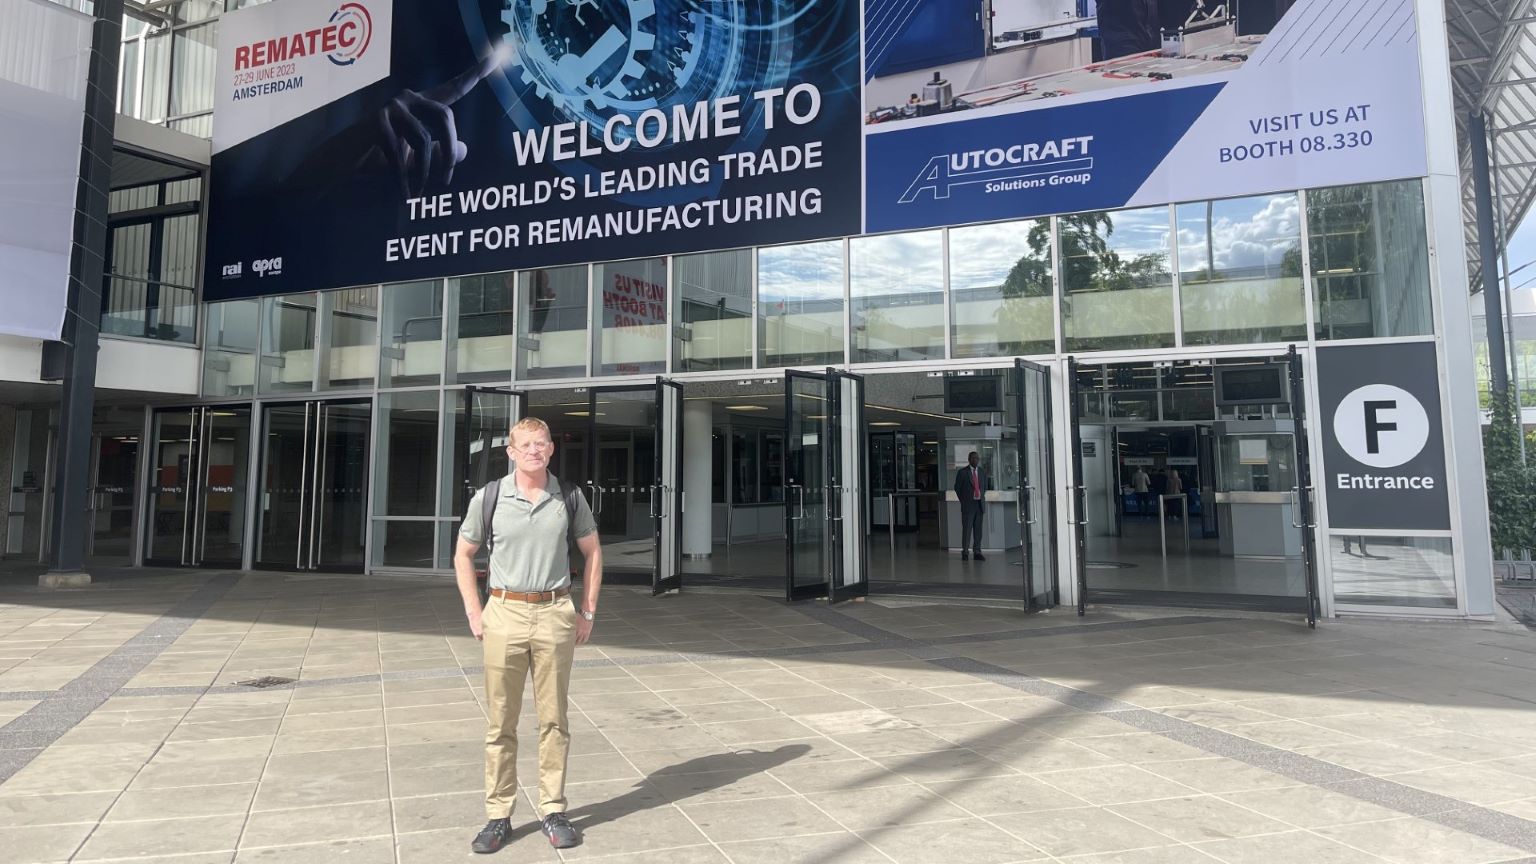 Tanoos made an academic journey abroad where he presented at four conferences in five days, across three different countries. At his second stop, he won best presenter for his work on global supply chain issues in the automotive industry.